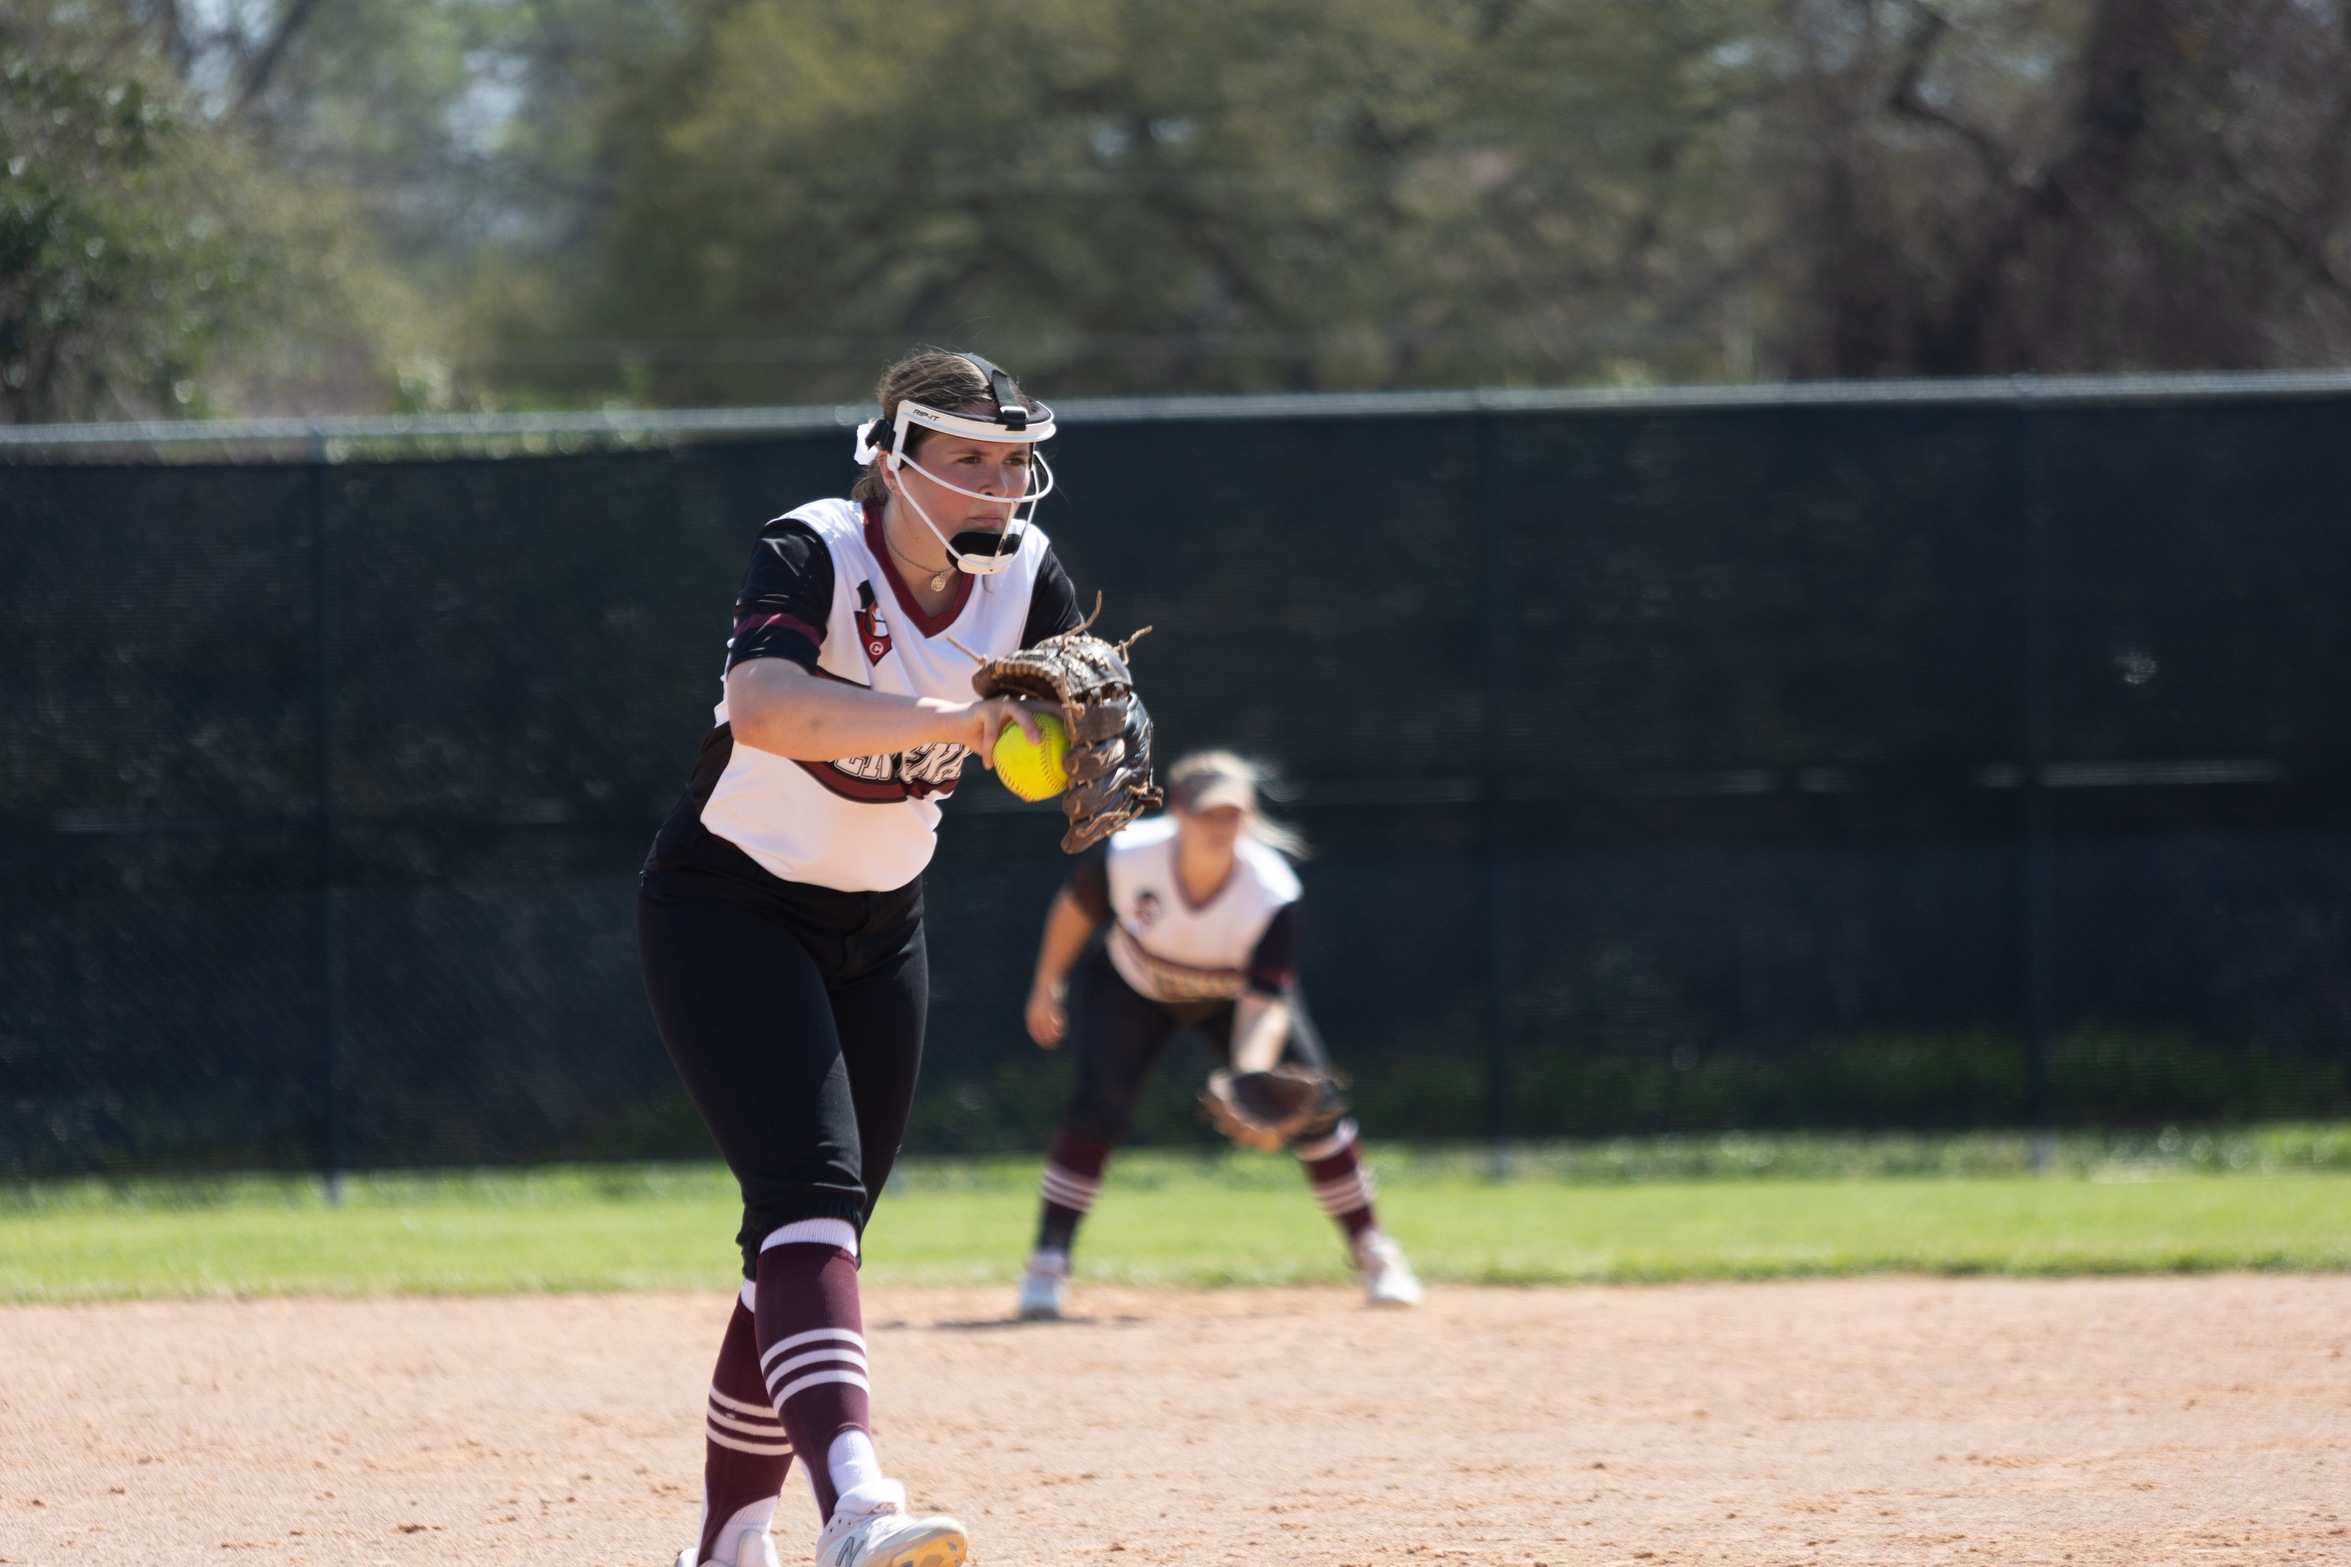 The Ladies clinched a berth in next weekend's SCAC Championship with their game two win.